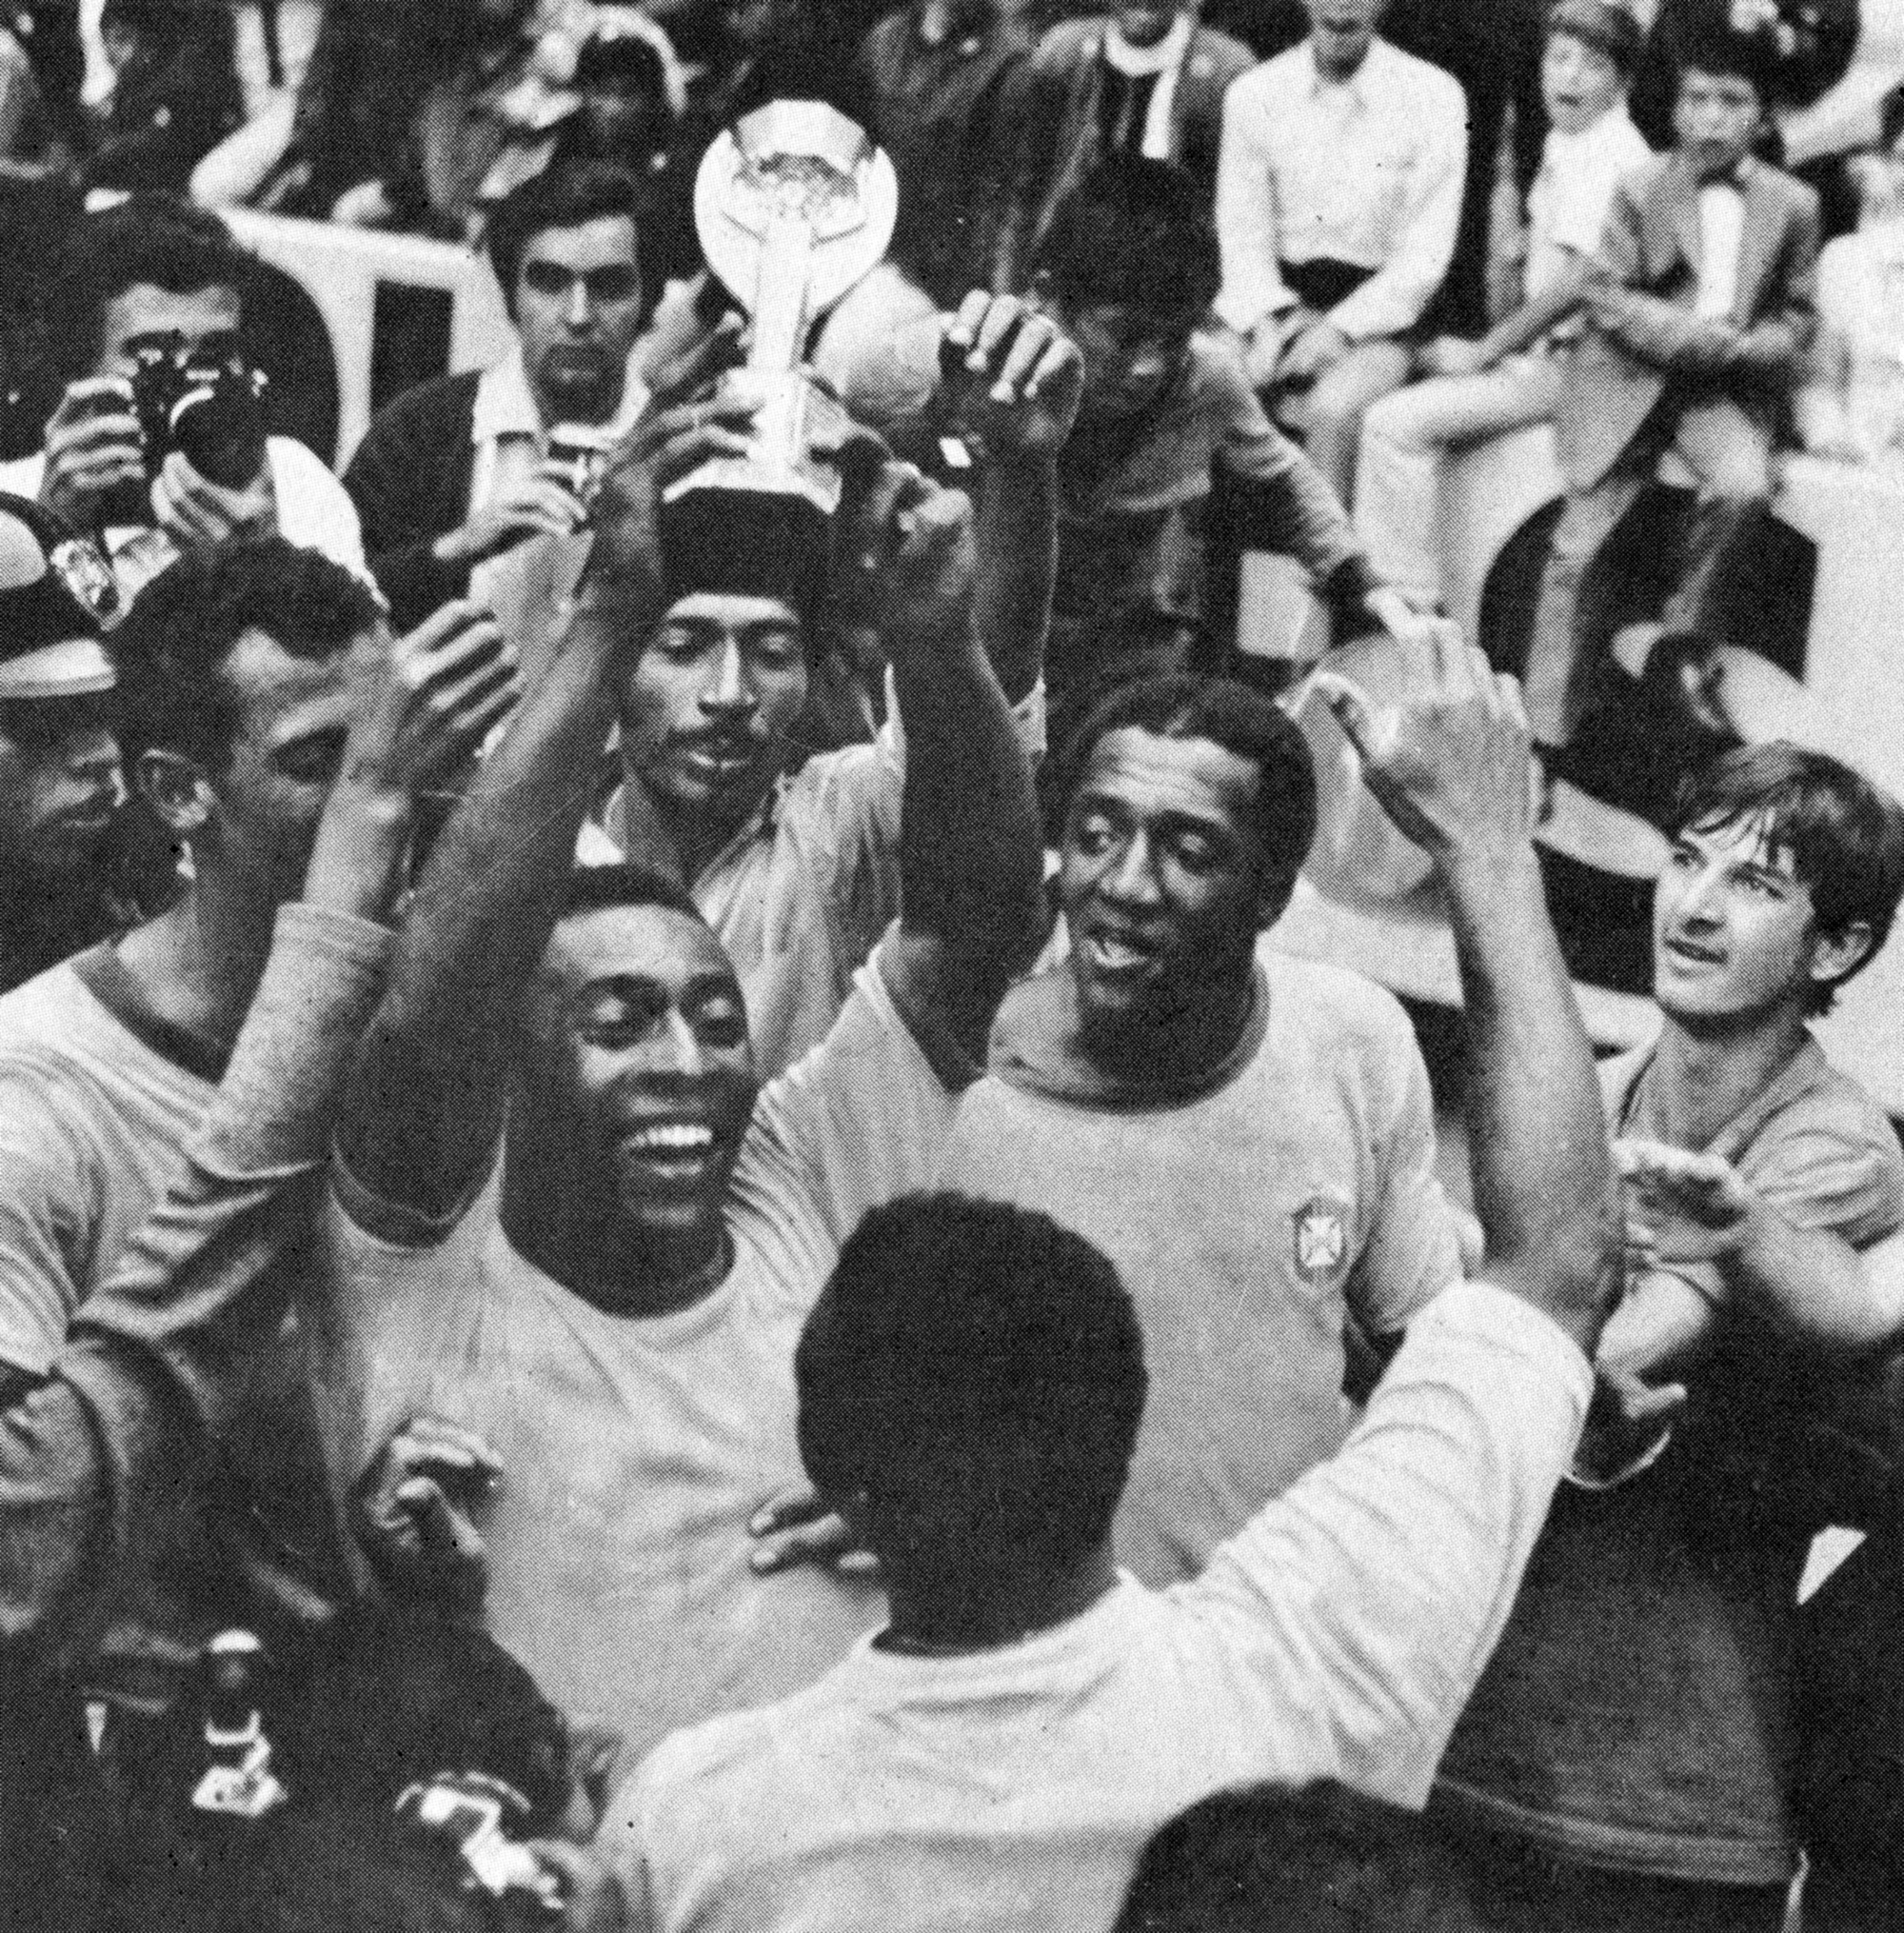 Football Fifa Mexico 1970 World Cup Final Brazil vs Italy 4-1 Pelè celebrates with the cup